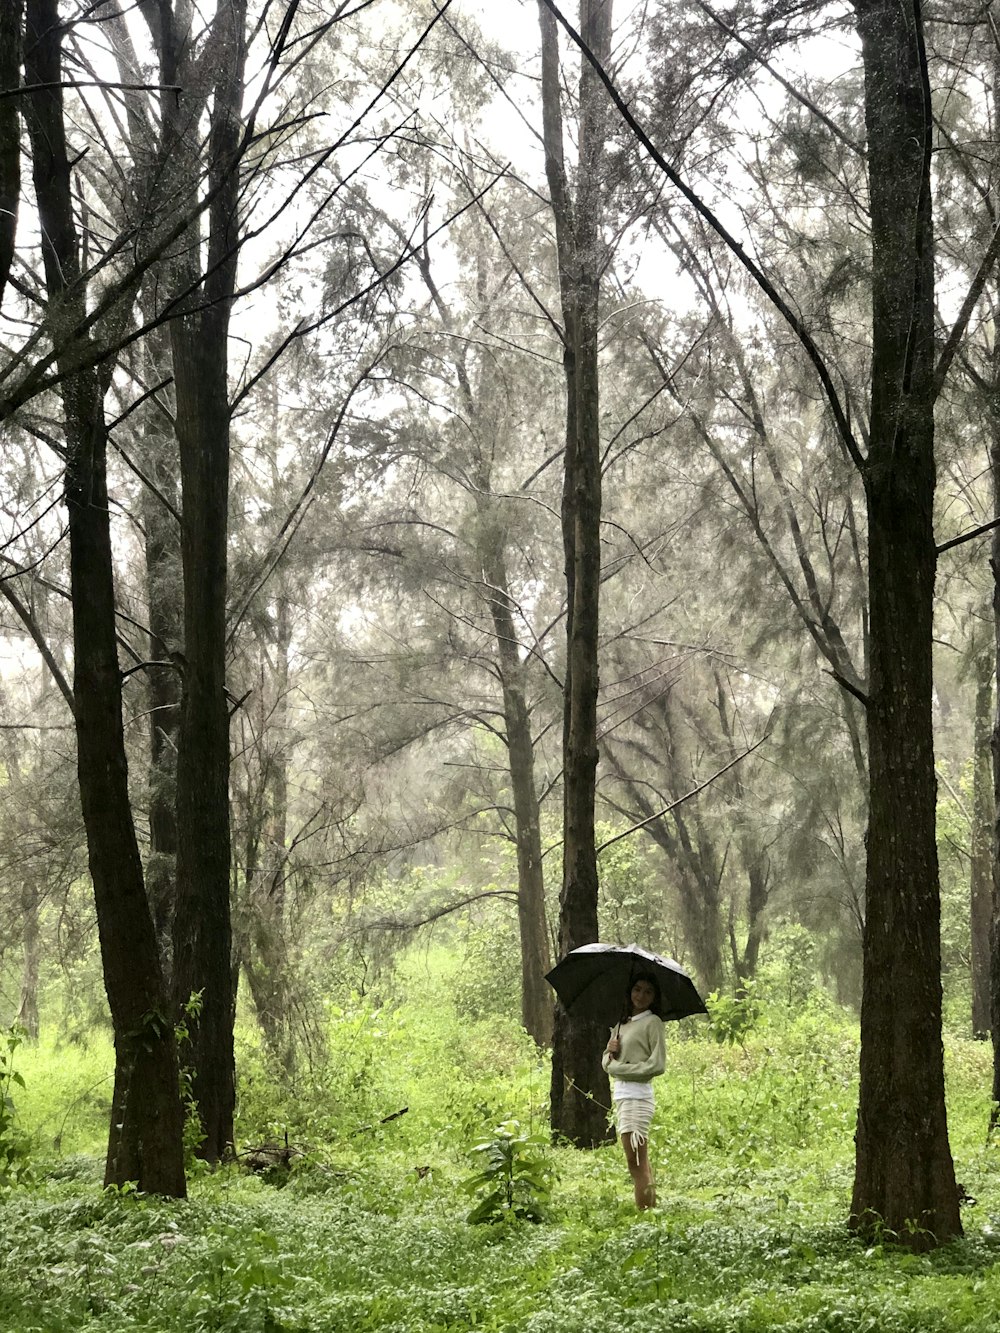 a person holding an umbrella in a forest